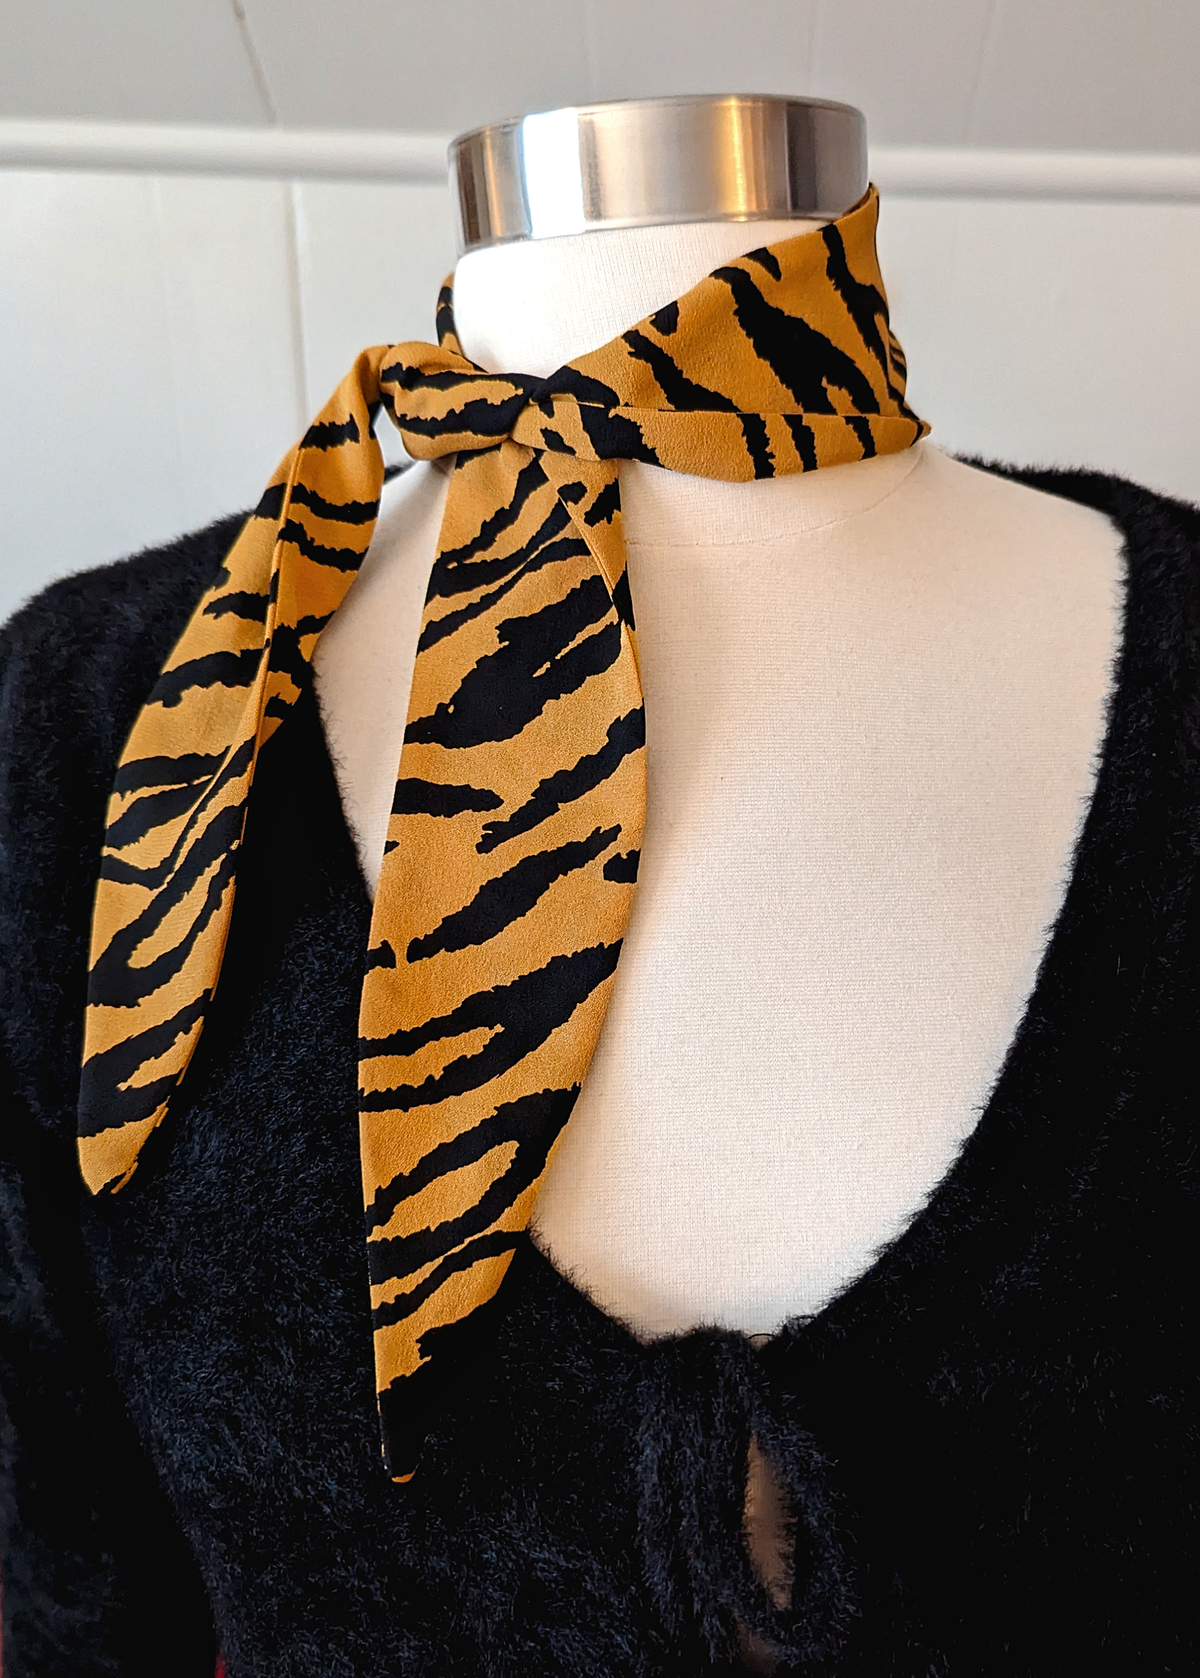 Orange Mustard and Black Tiger Print Silk Scarf Neck Tie by I'm With the Band, handmade in california